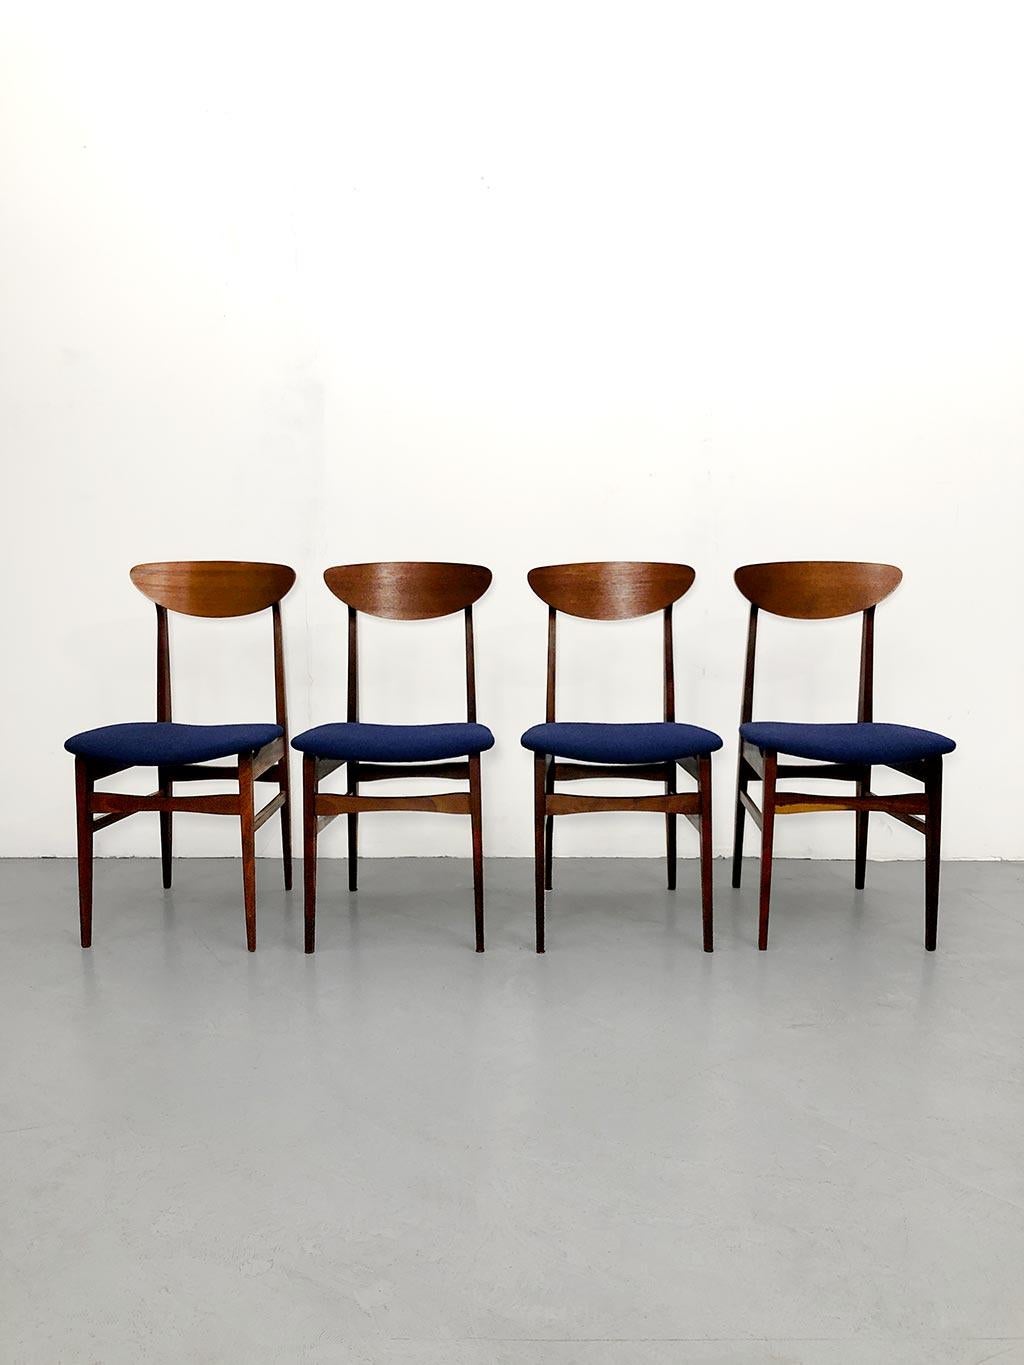 Set consisting of 4 dining chairs manufactured by Farstrup, Denmark, in the 1960s. Beech frame and teak backrest. The seat was restored by professional upholsterers and upholstered in Society's blue-colored wool Bouclè. Their condition is very good